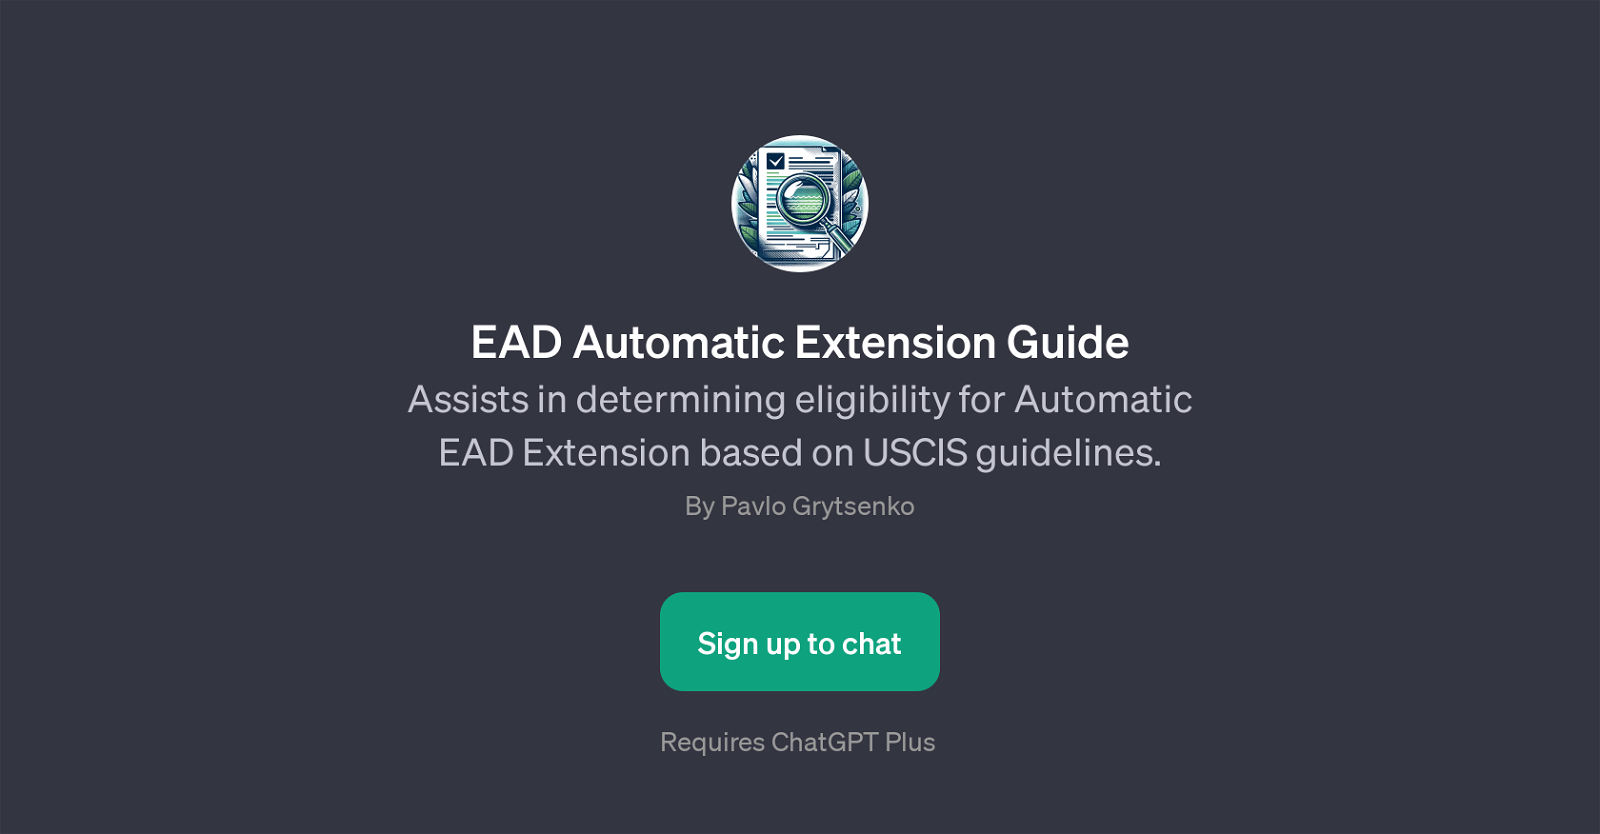 EAD Automatic Extension Guide website